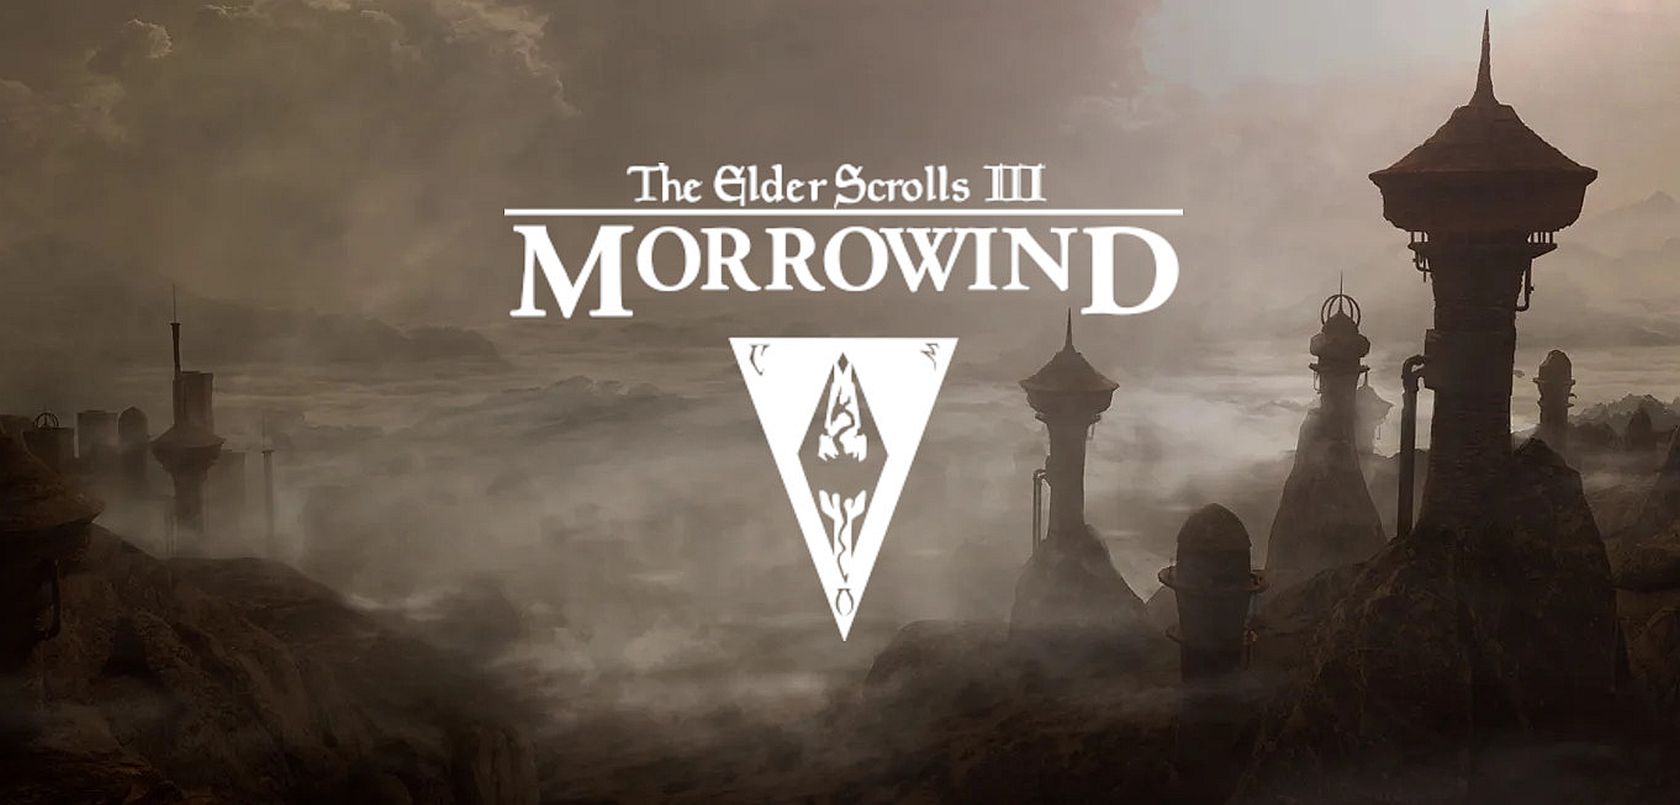 Image for The Elder Scrolls 3: Morrowind GOTY Edition headlines February's Prime Gaming lineup